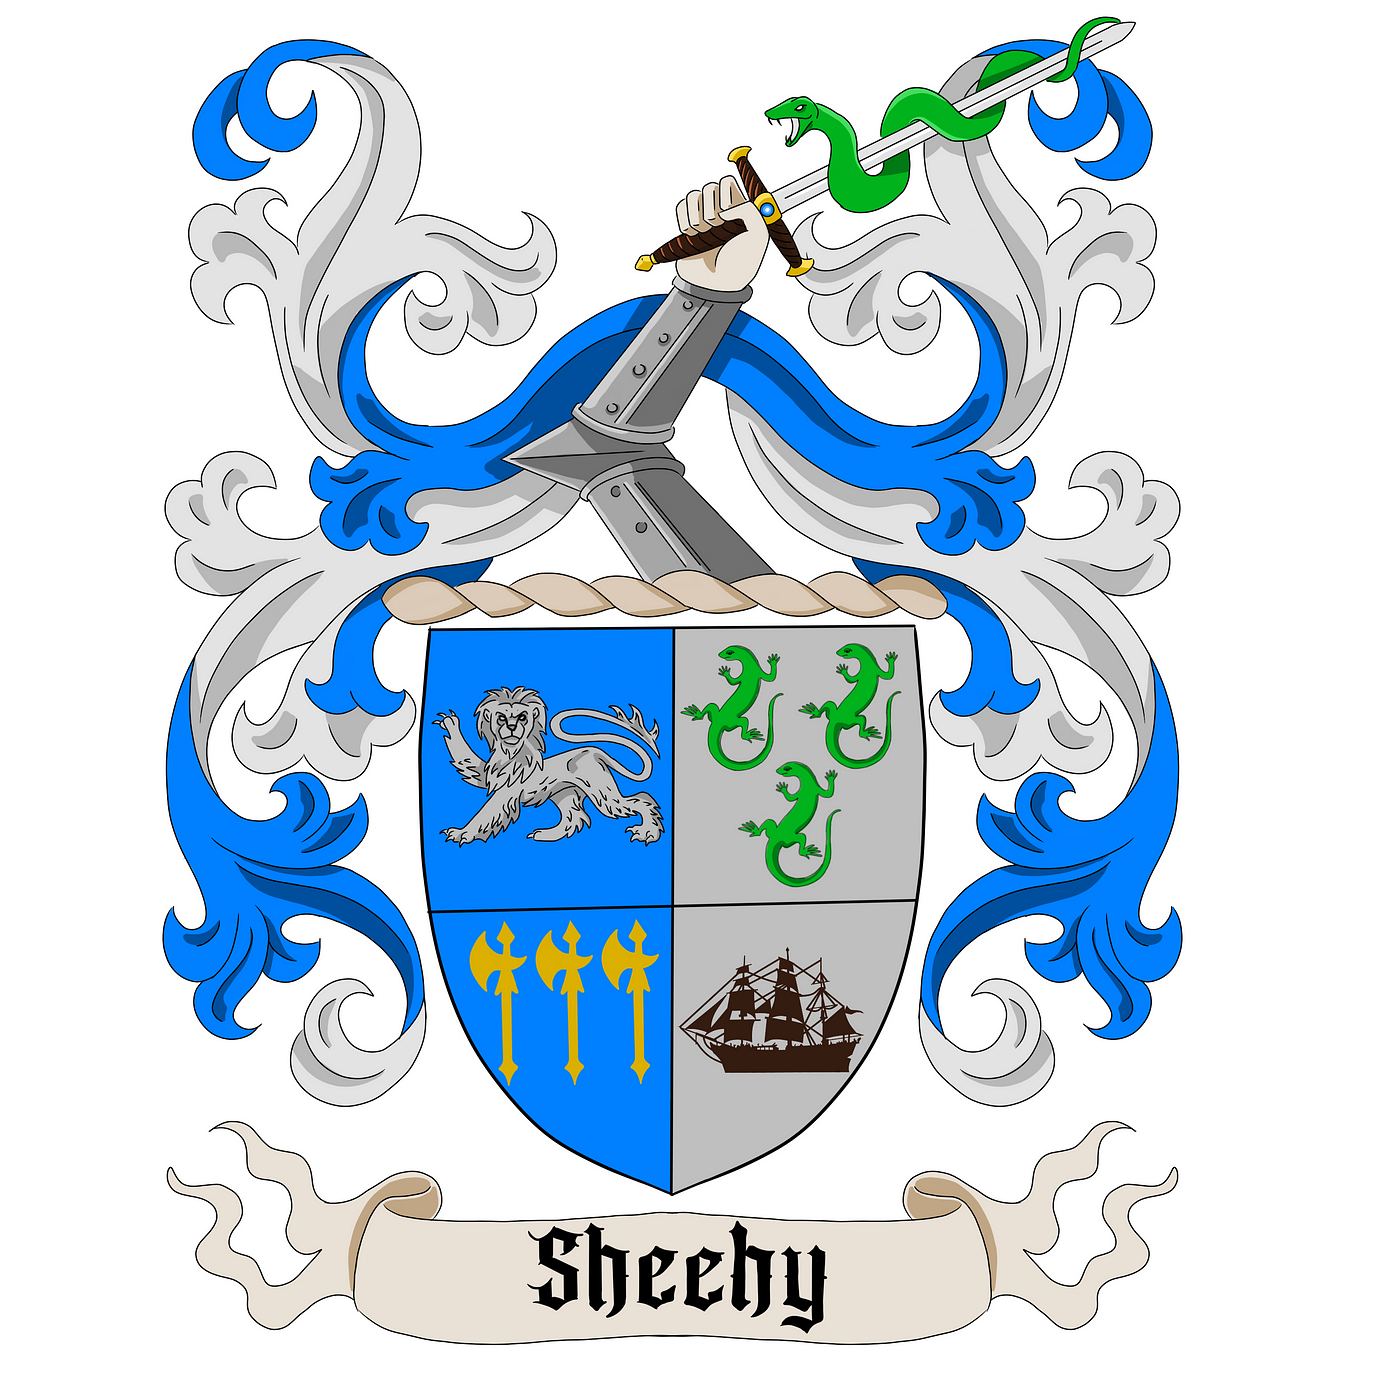 The Sheehy Family Crest. In High Valley, at Grandma Sheehy's…